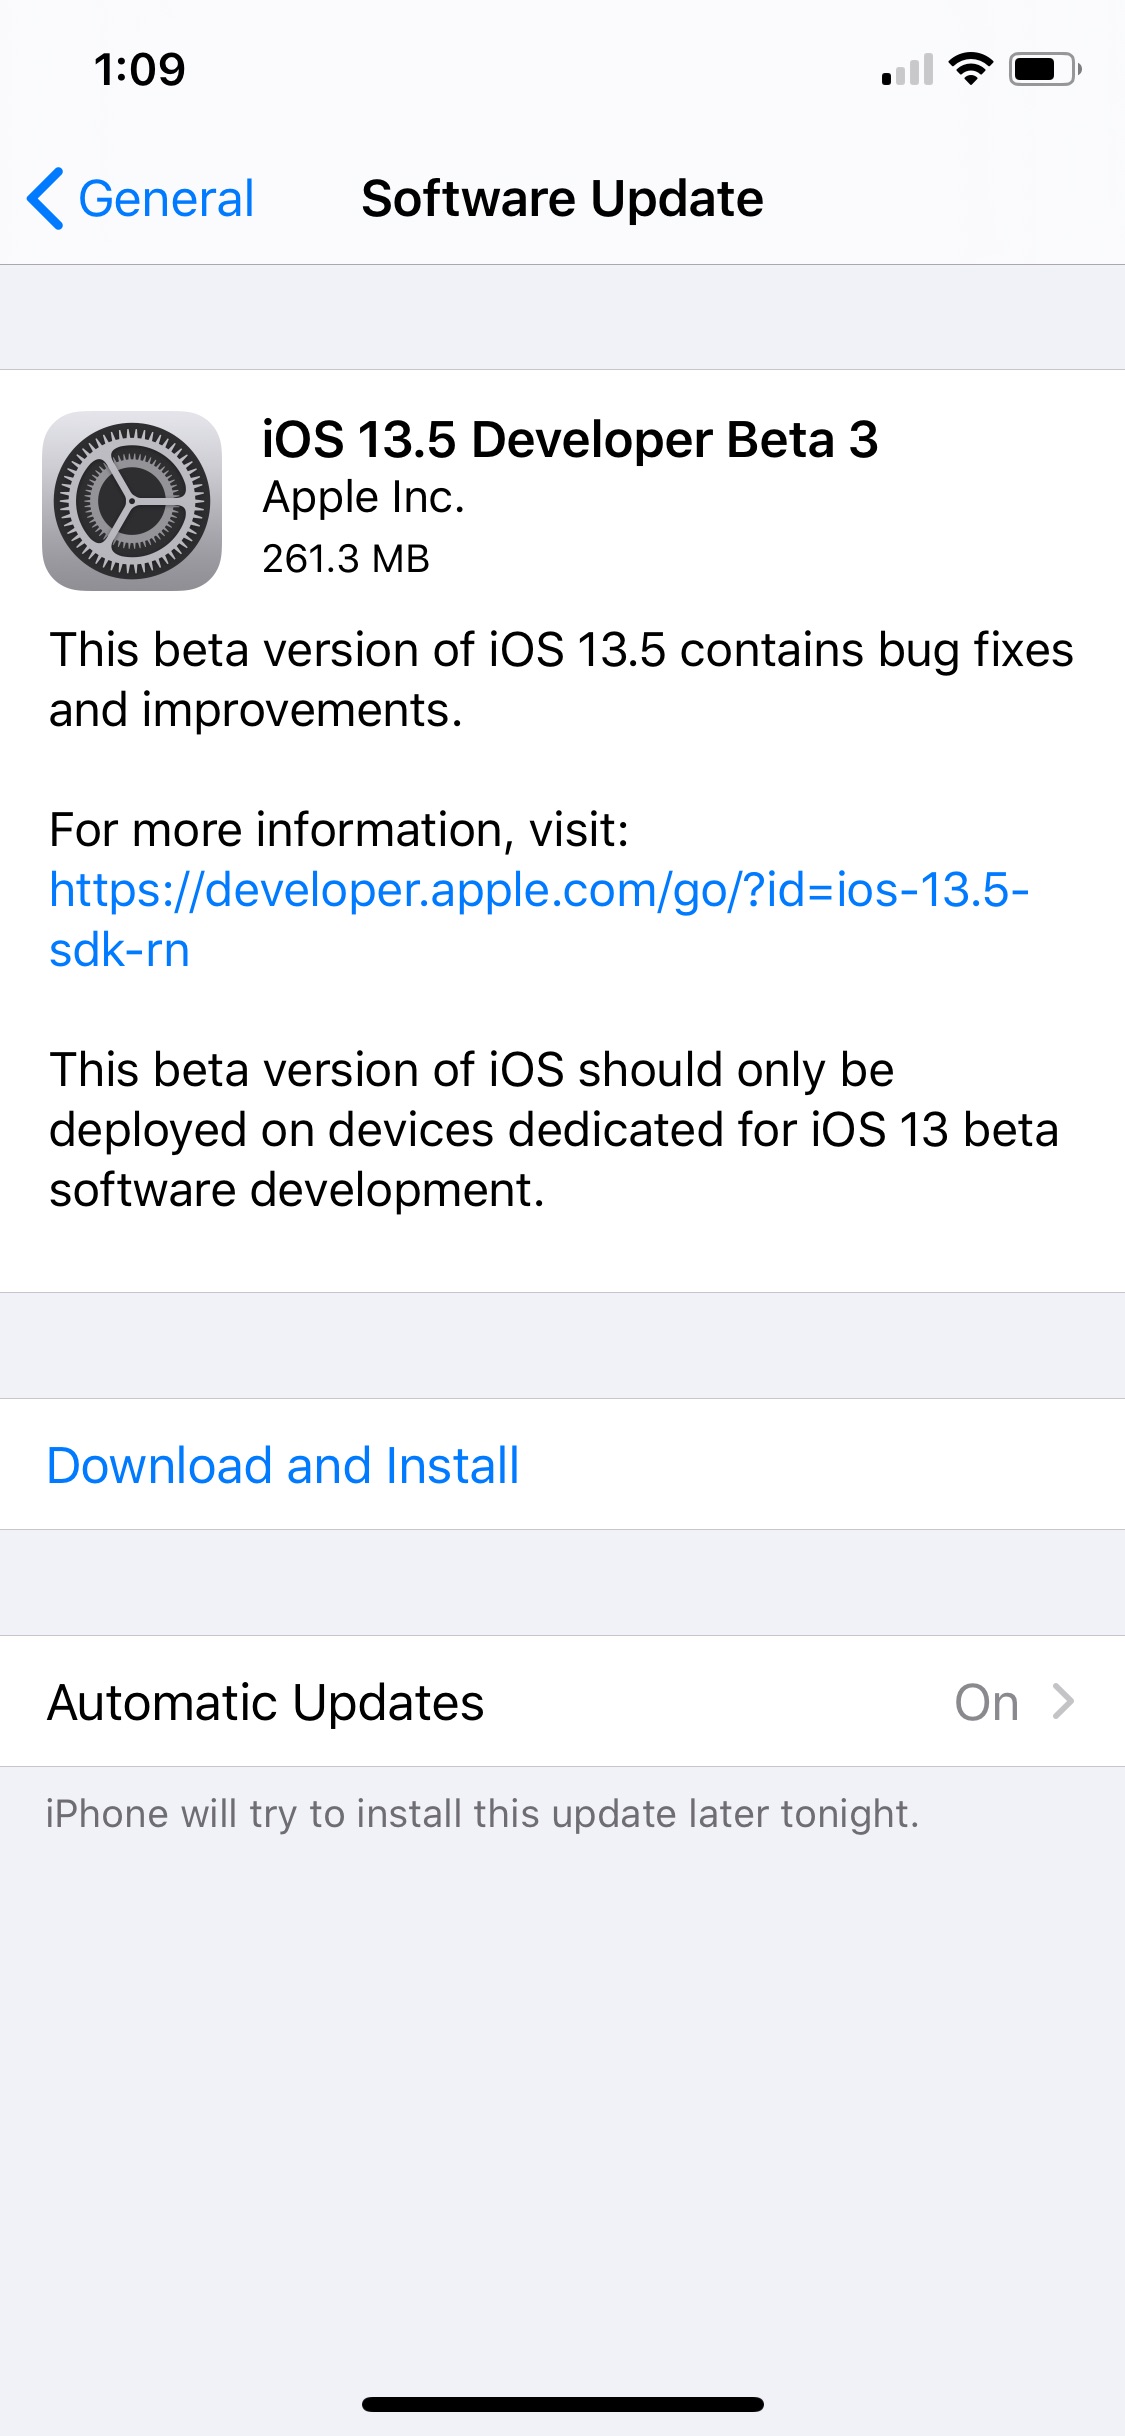 Apple Releases iOS 13.5 Beta 3 and iPadOS 13.5 Beta 3 [Download]